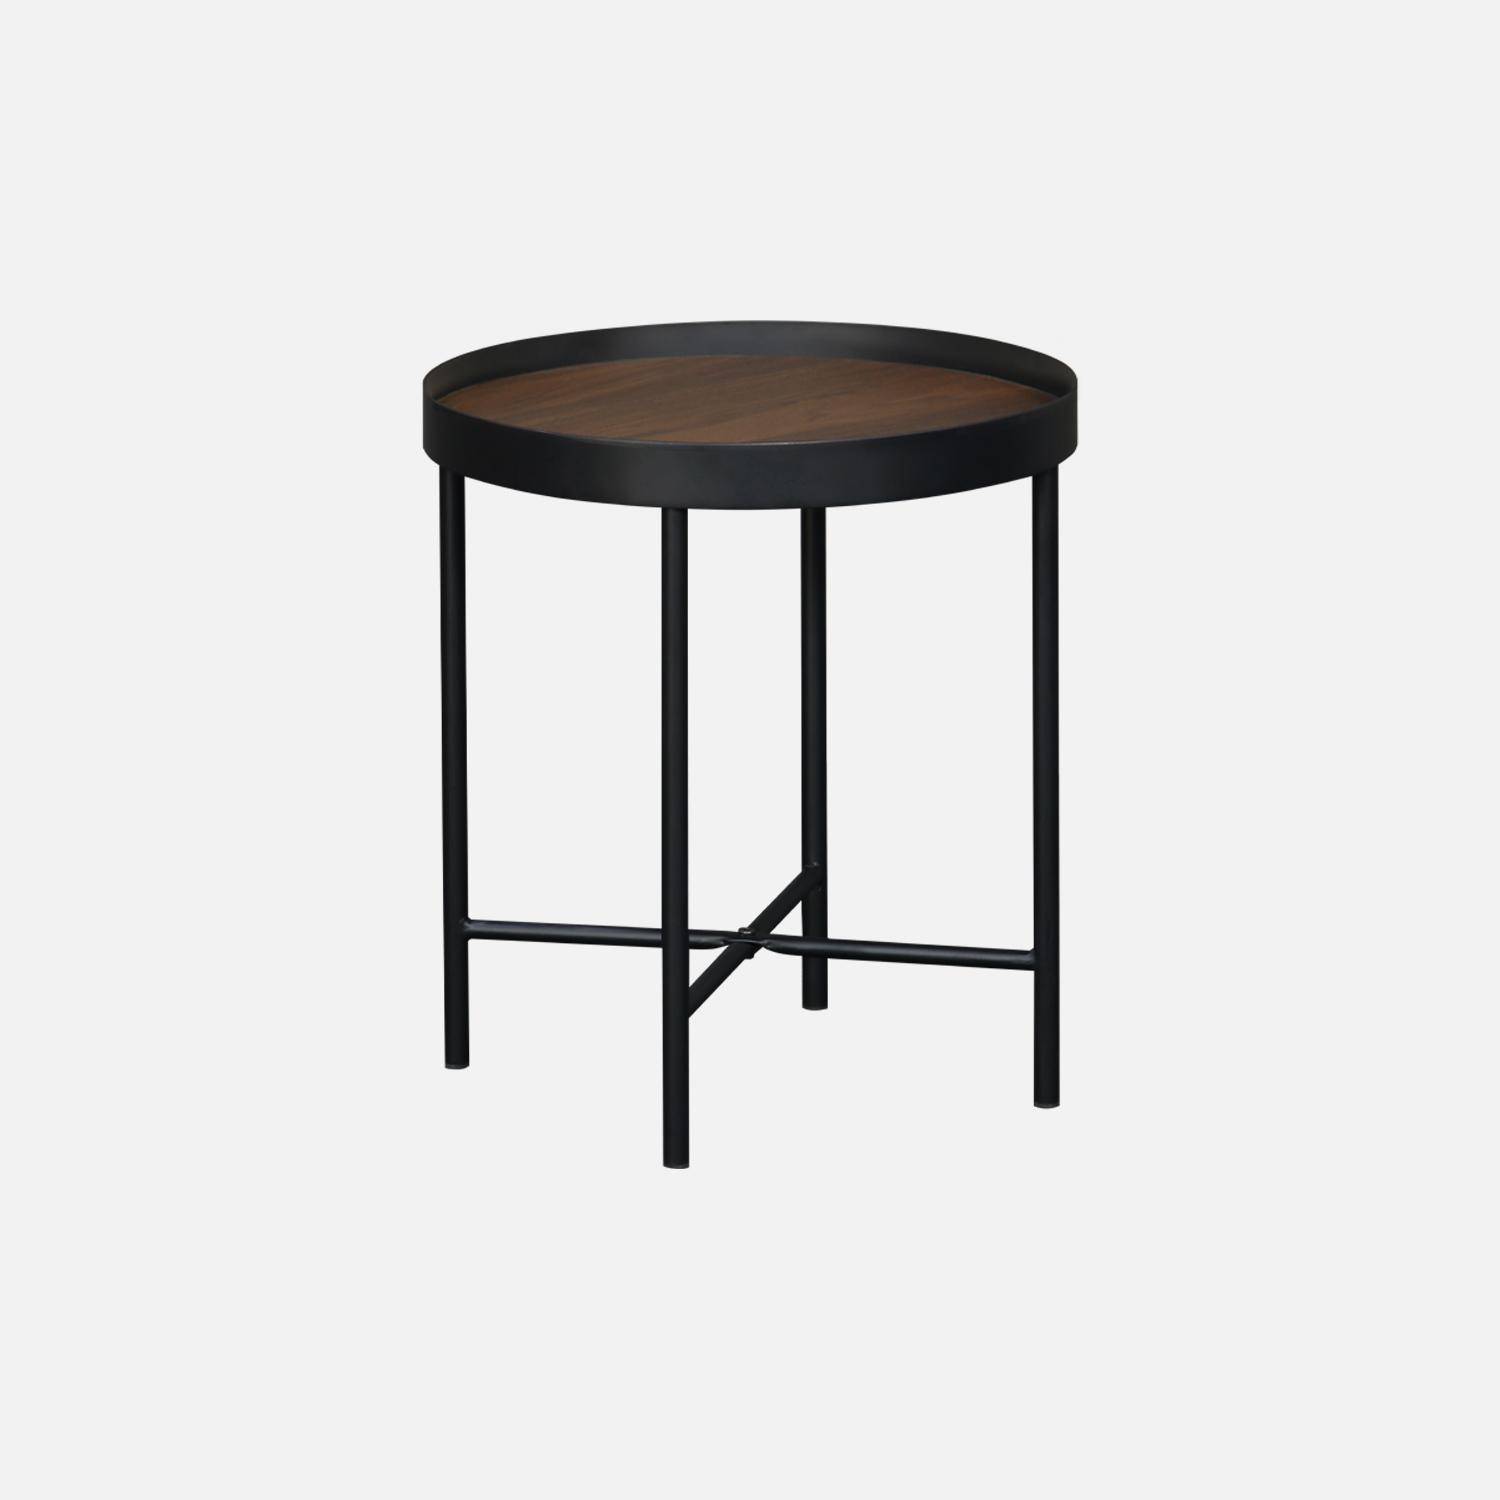 Set of 2 practical round nesting tables in walnut-effect MDF with black legs,sweeek,Photo6